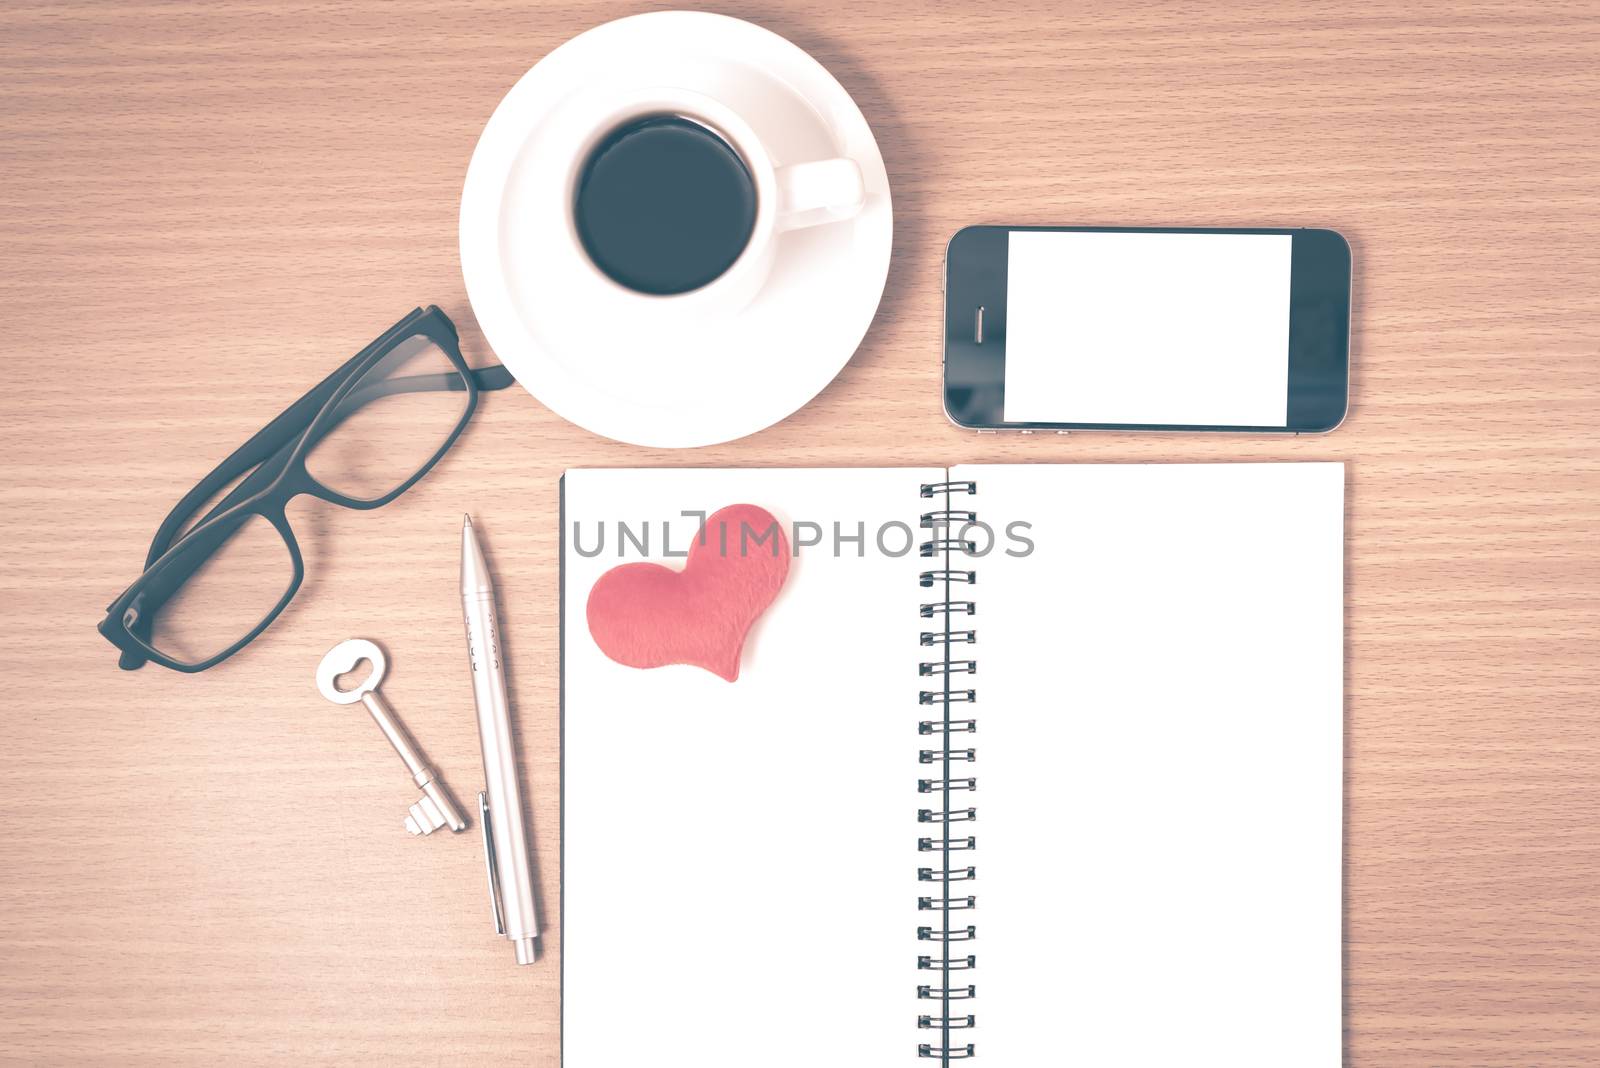 office desk : coffee and phone with key,eyeglasses,notepad,heart on wood background vintage style